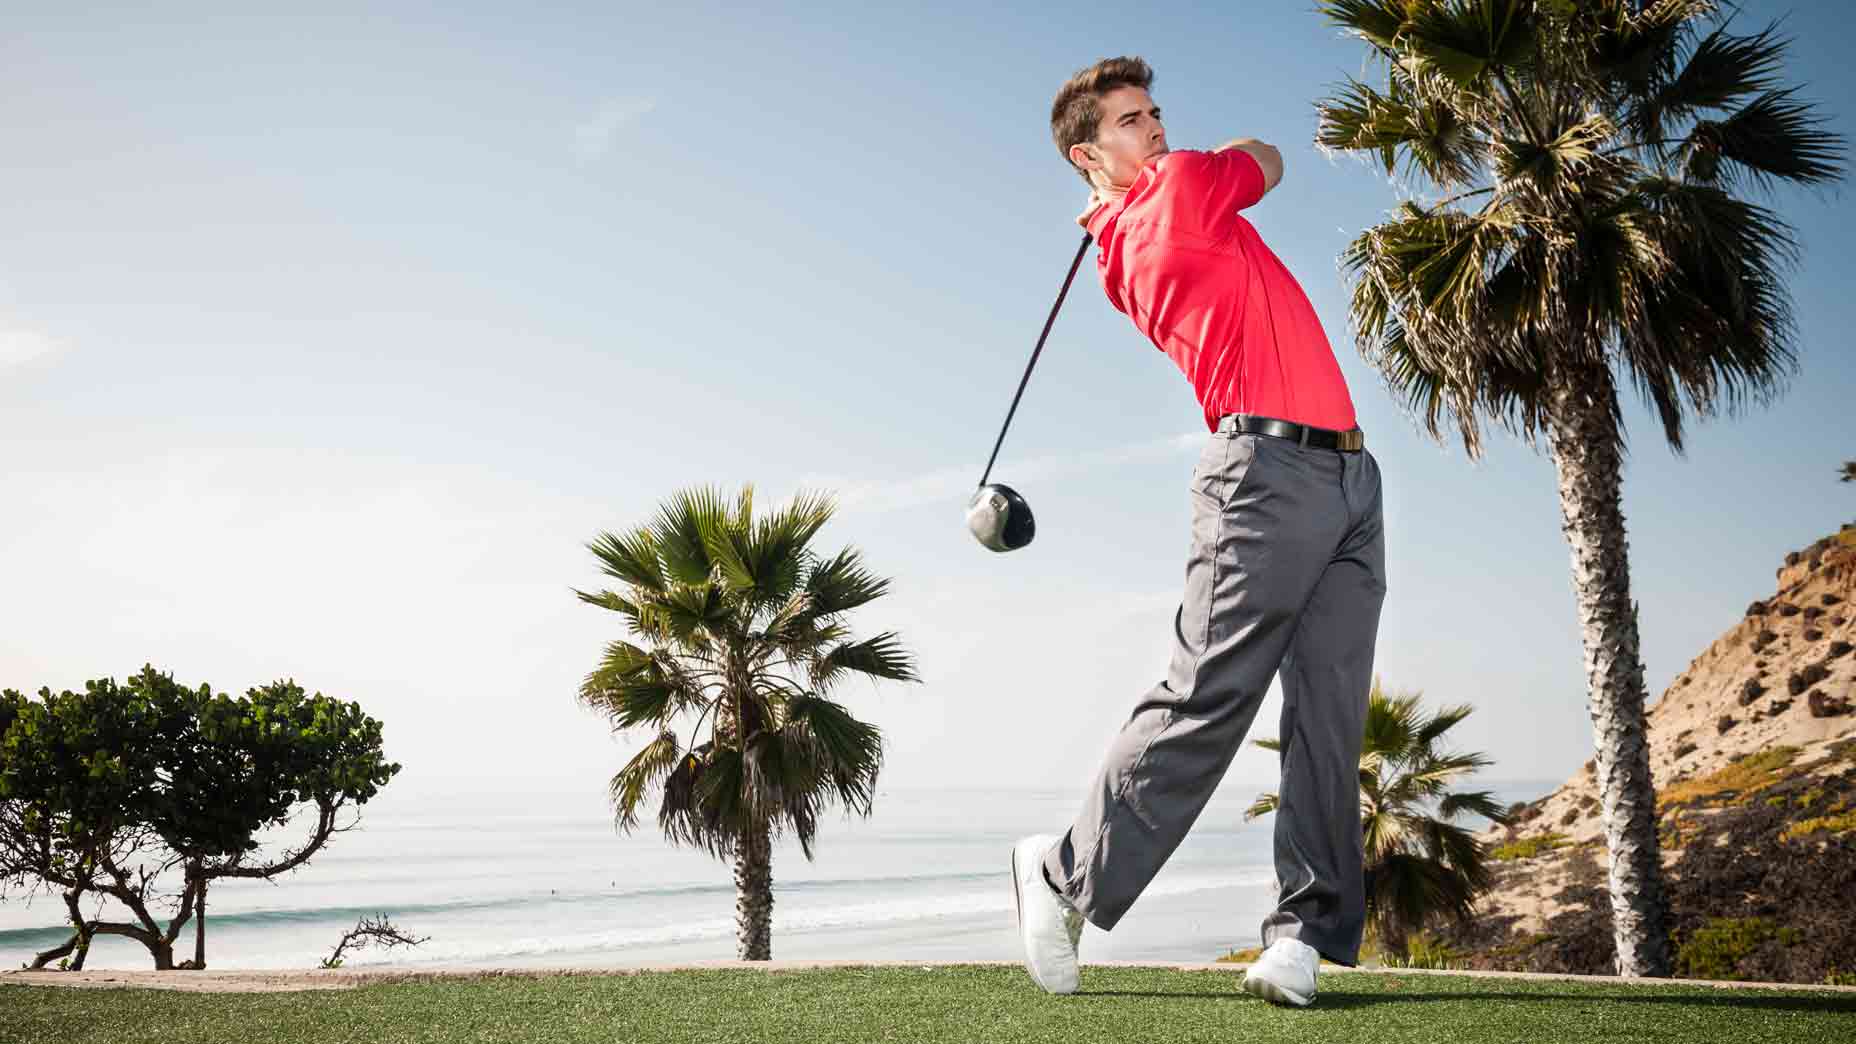 Here's how to increase your swing speed in just 60 seconds